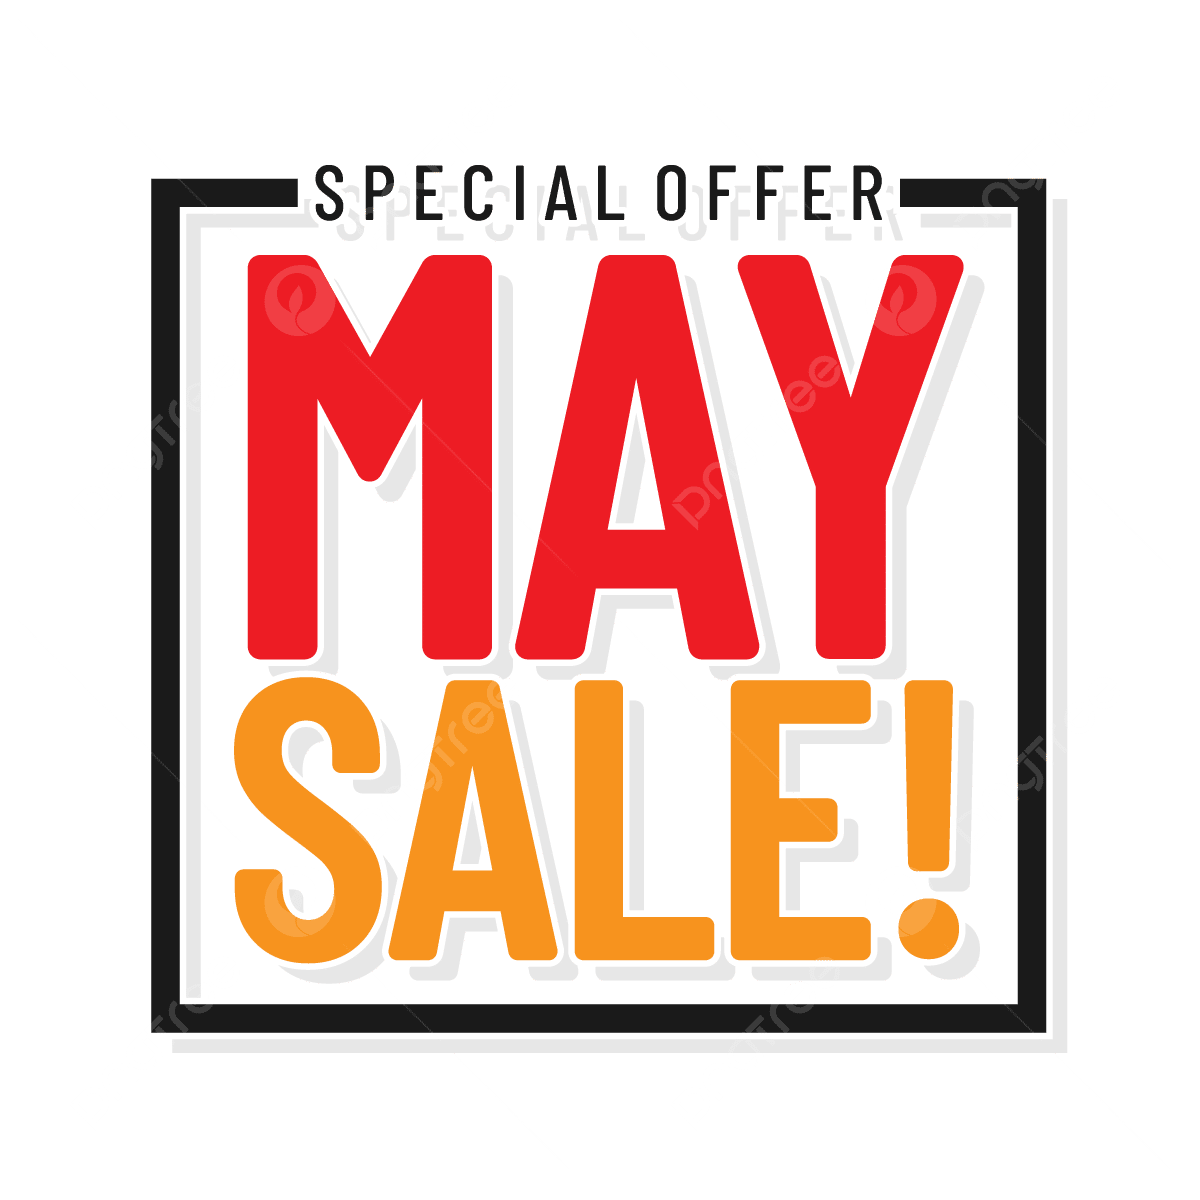 pngtree-may-sale-special-offer-banner-png-image_6963749